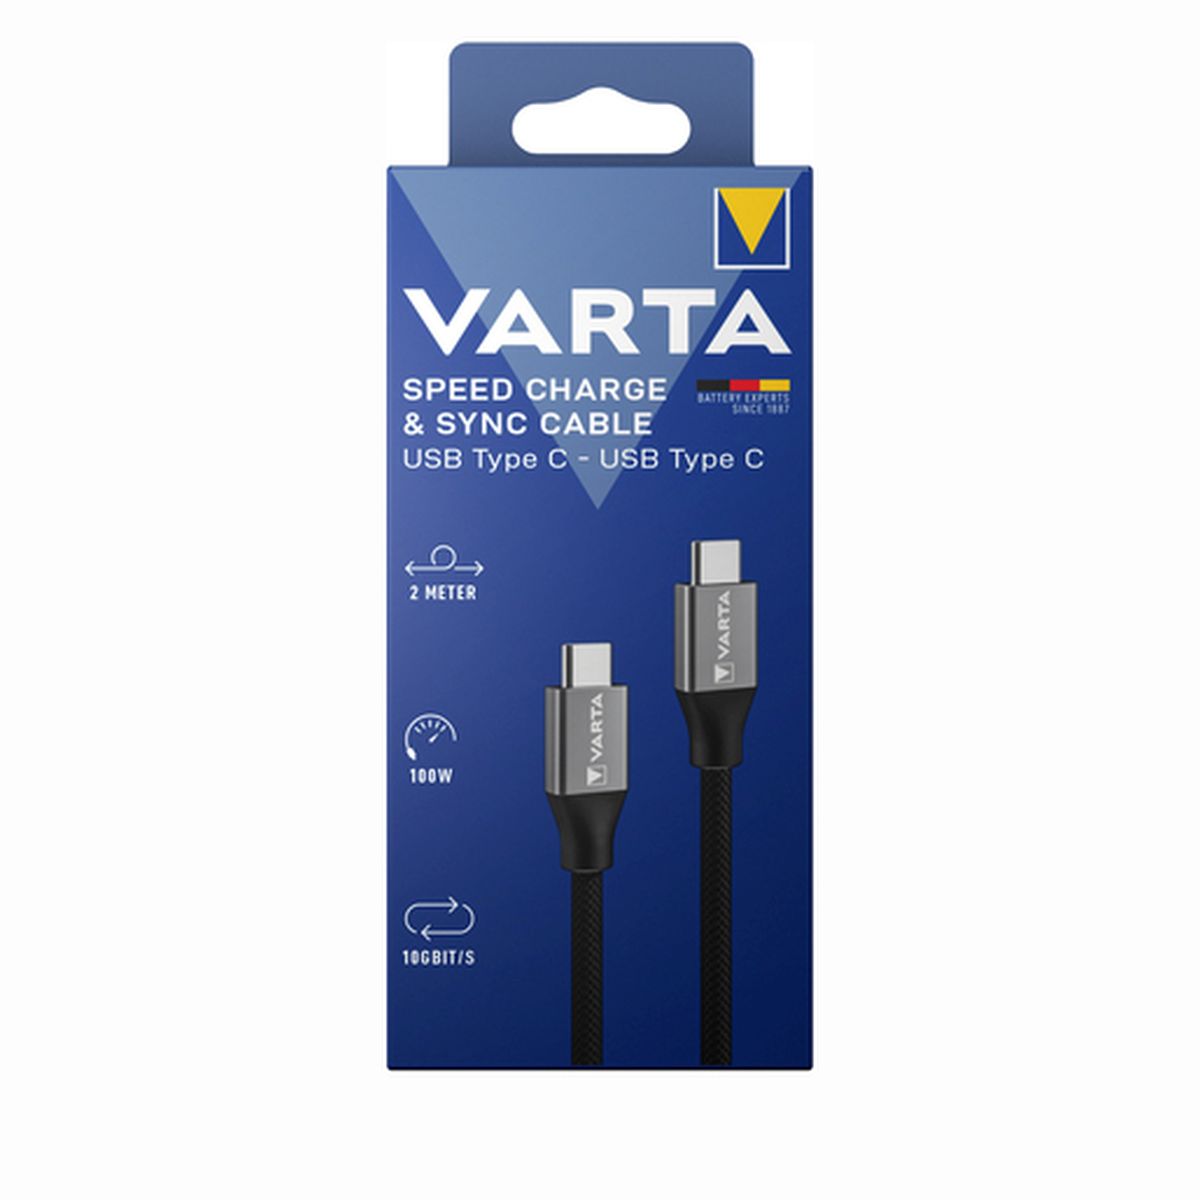 Varta USB Type C to Type C Speed Charge & Sync Cable